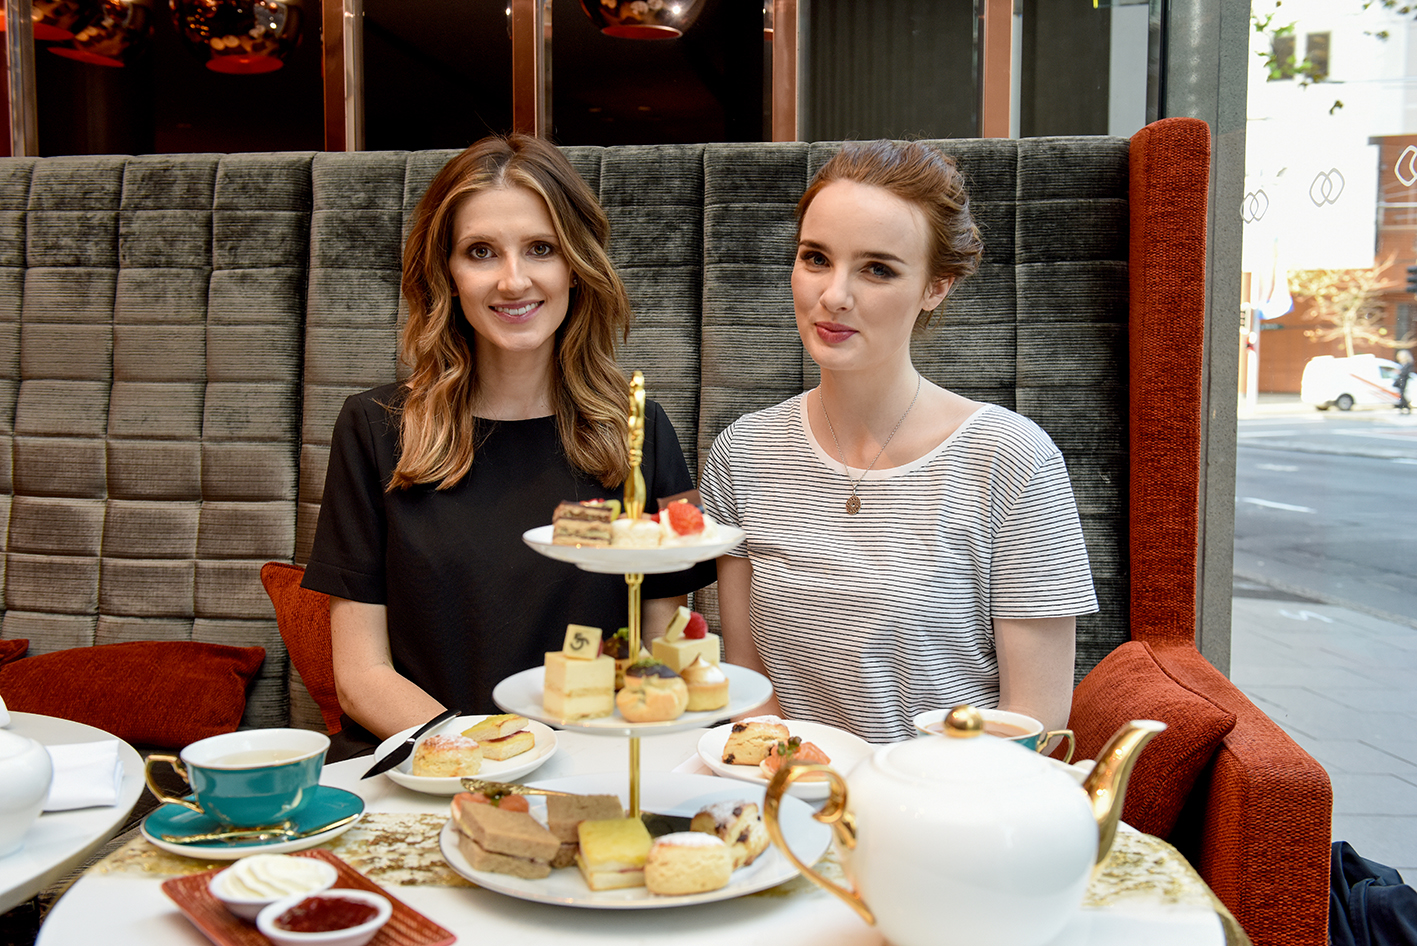 Date with Kate Kate Waterhouse (left) with Anna O'Byrne 12th May 2016. Photo: Steven Siewert